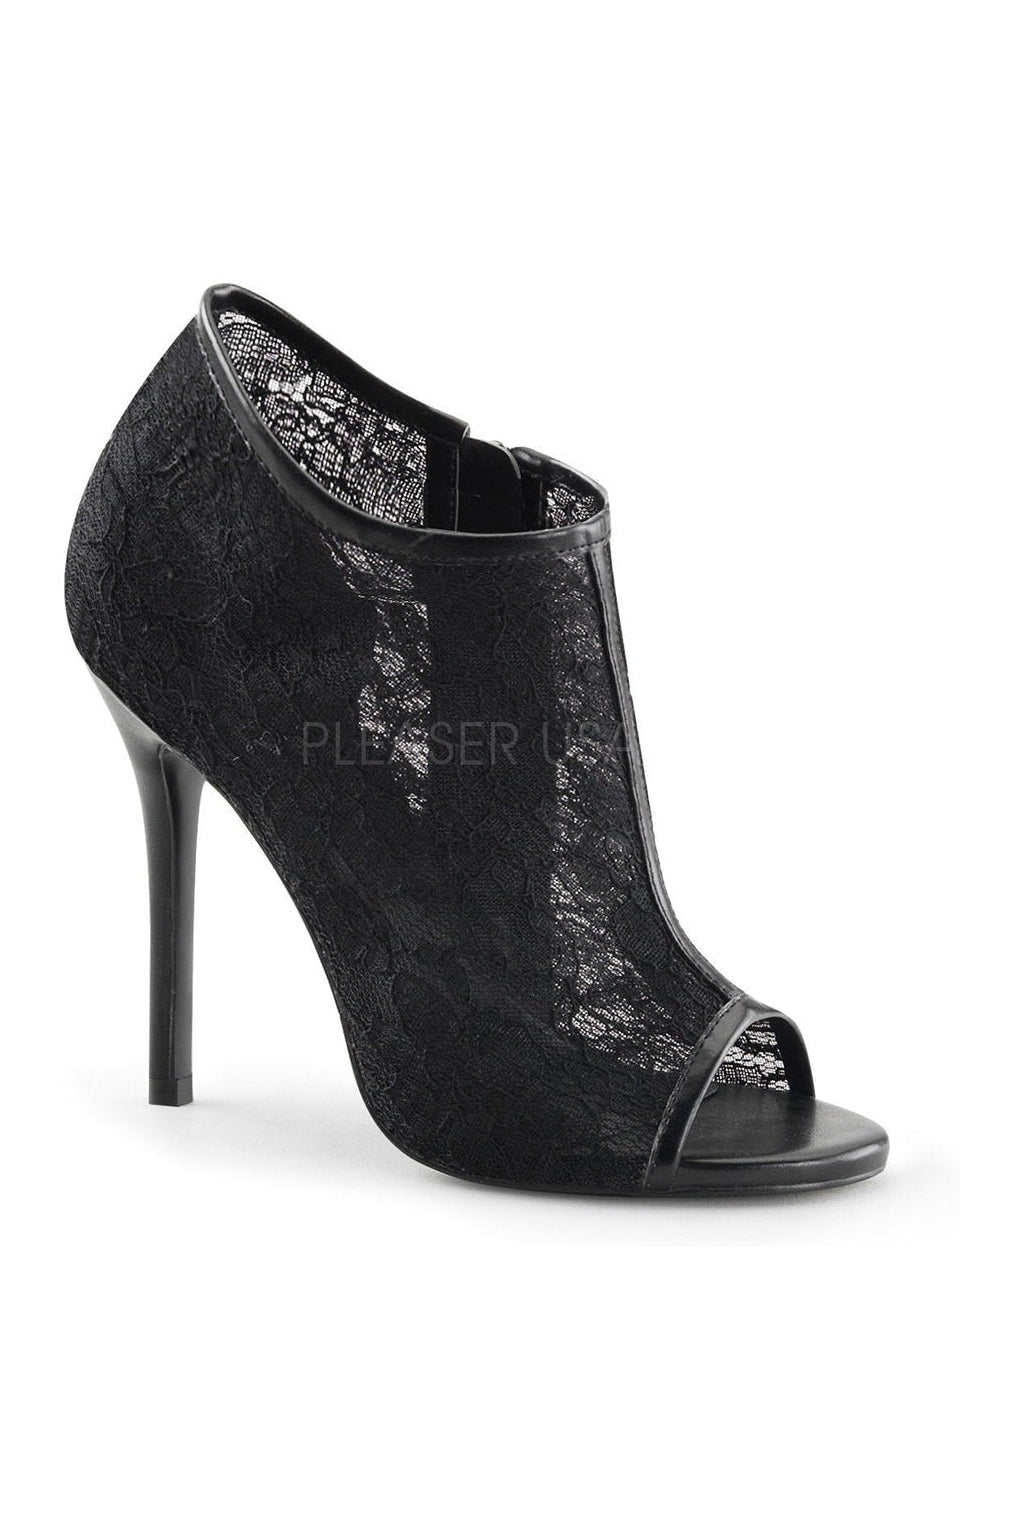 AMUSE-56 Bootie | Black Fabric-Fabulicious-Black-Ankle Boots-SEXYSHOES.COM